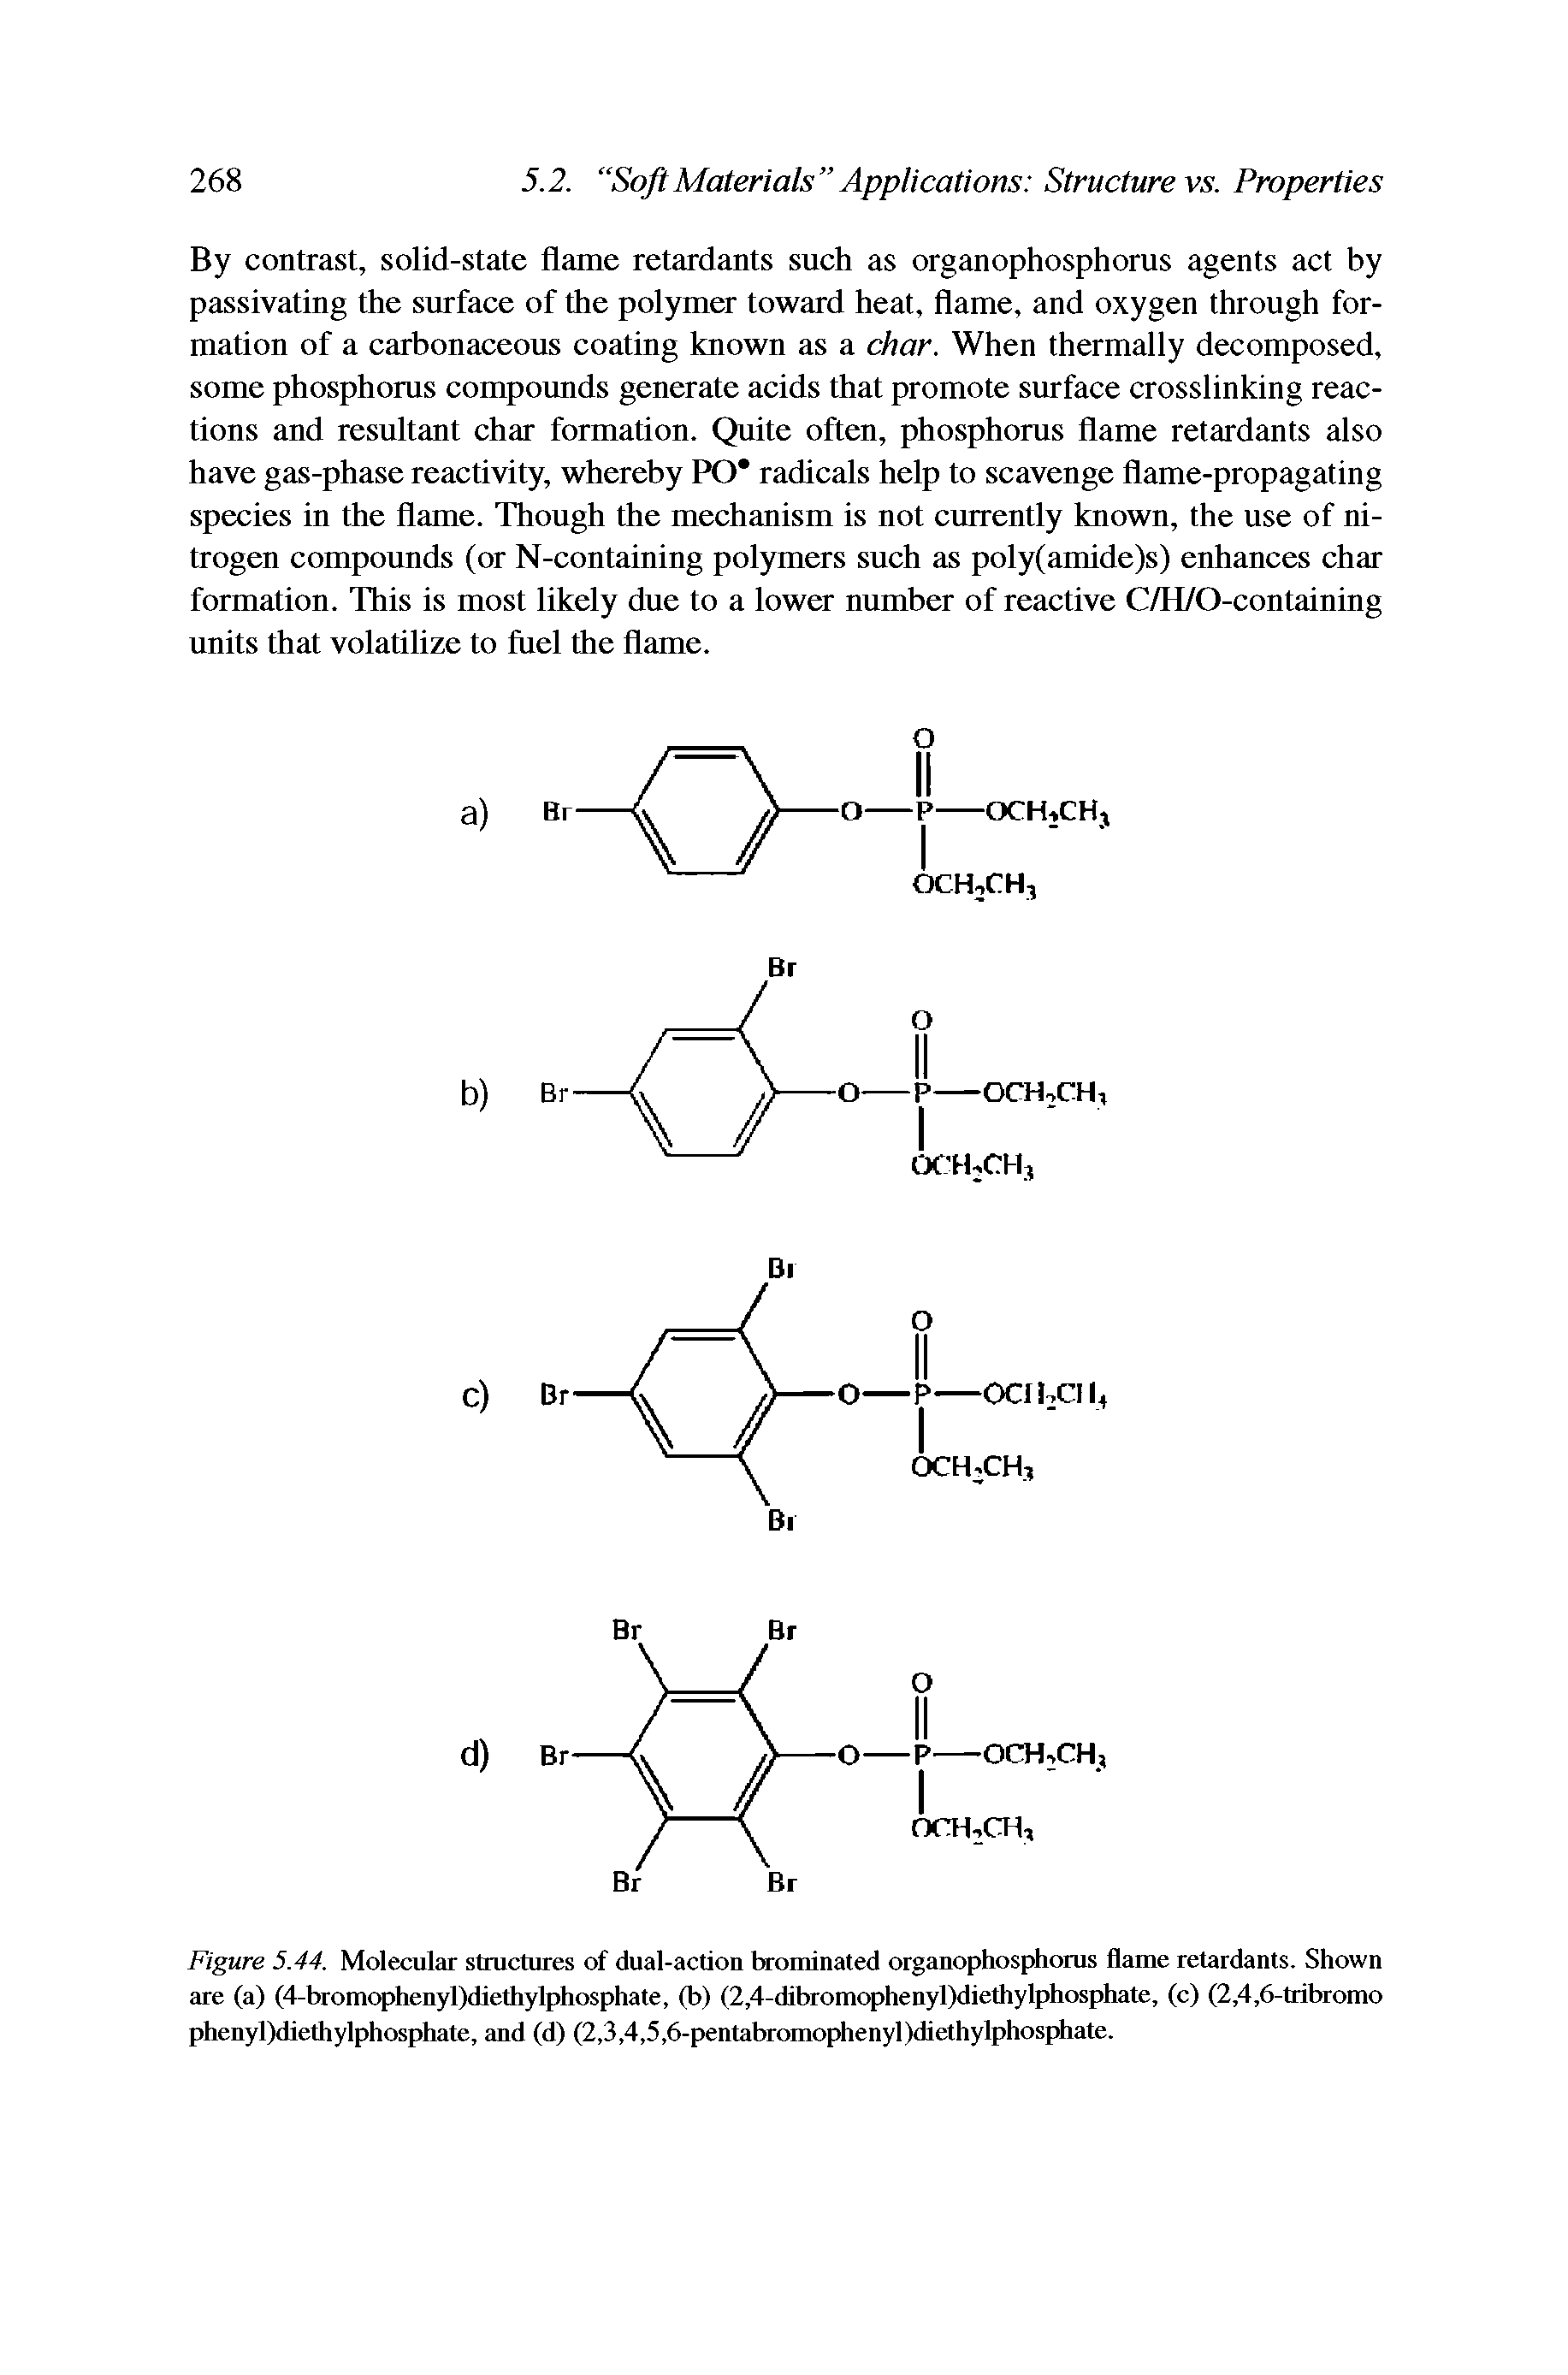 Figure 5.44. Molecular structures of dual-action brominated organophosphorus flame retardants. Shown are (a) (4-bromophenyl)diethylphosphate, (b) (2,4-dibromophenyl)diethylphosphate, (c) (2,4,6-tribromo phenyl)diethylphosphate, and (d) (2,3,4,5,6-pentabromophenyl)diethylphosphate.